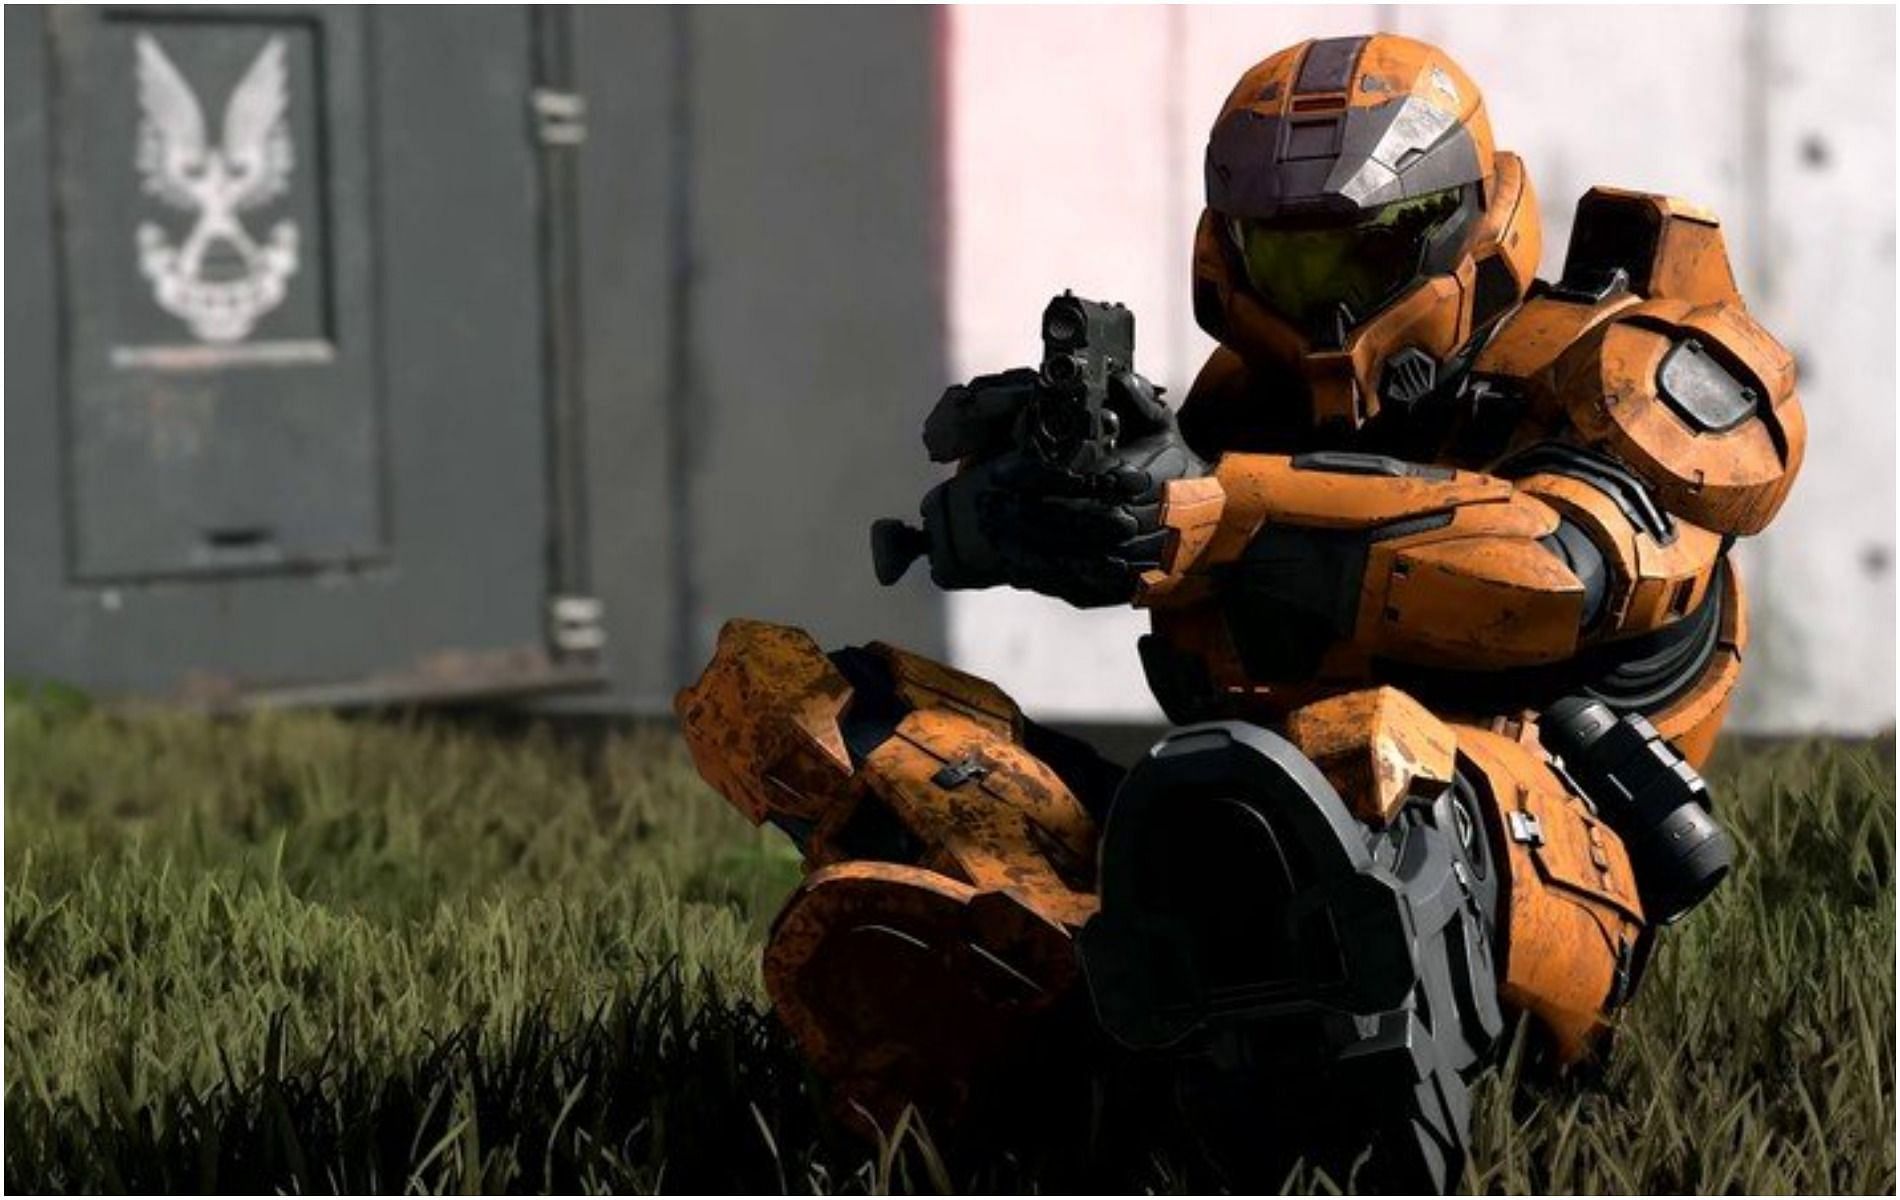 Halo Infinite's Master Chief armor costs more than the game it